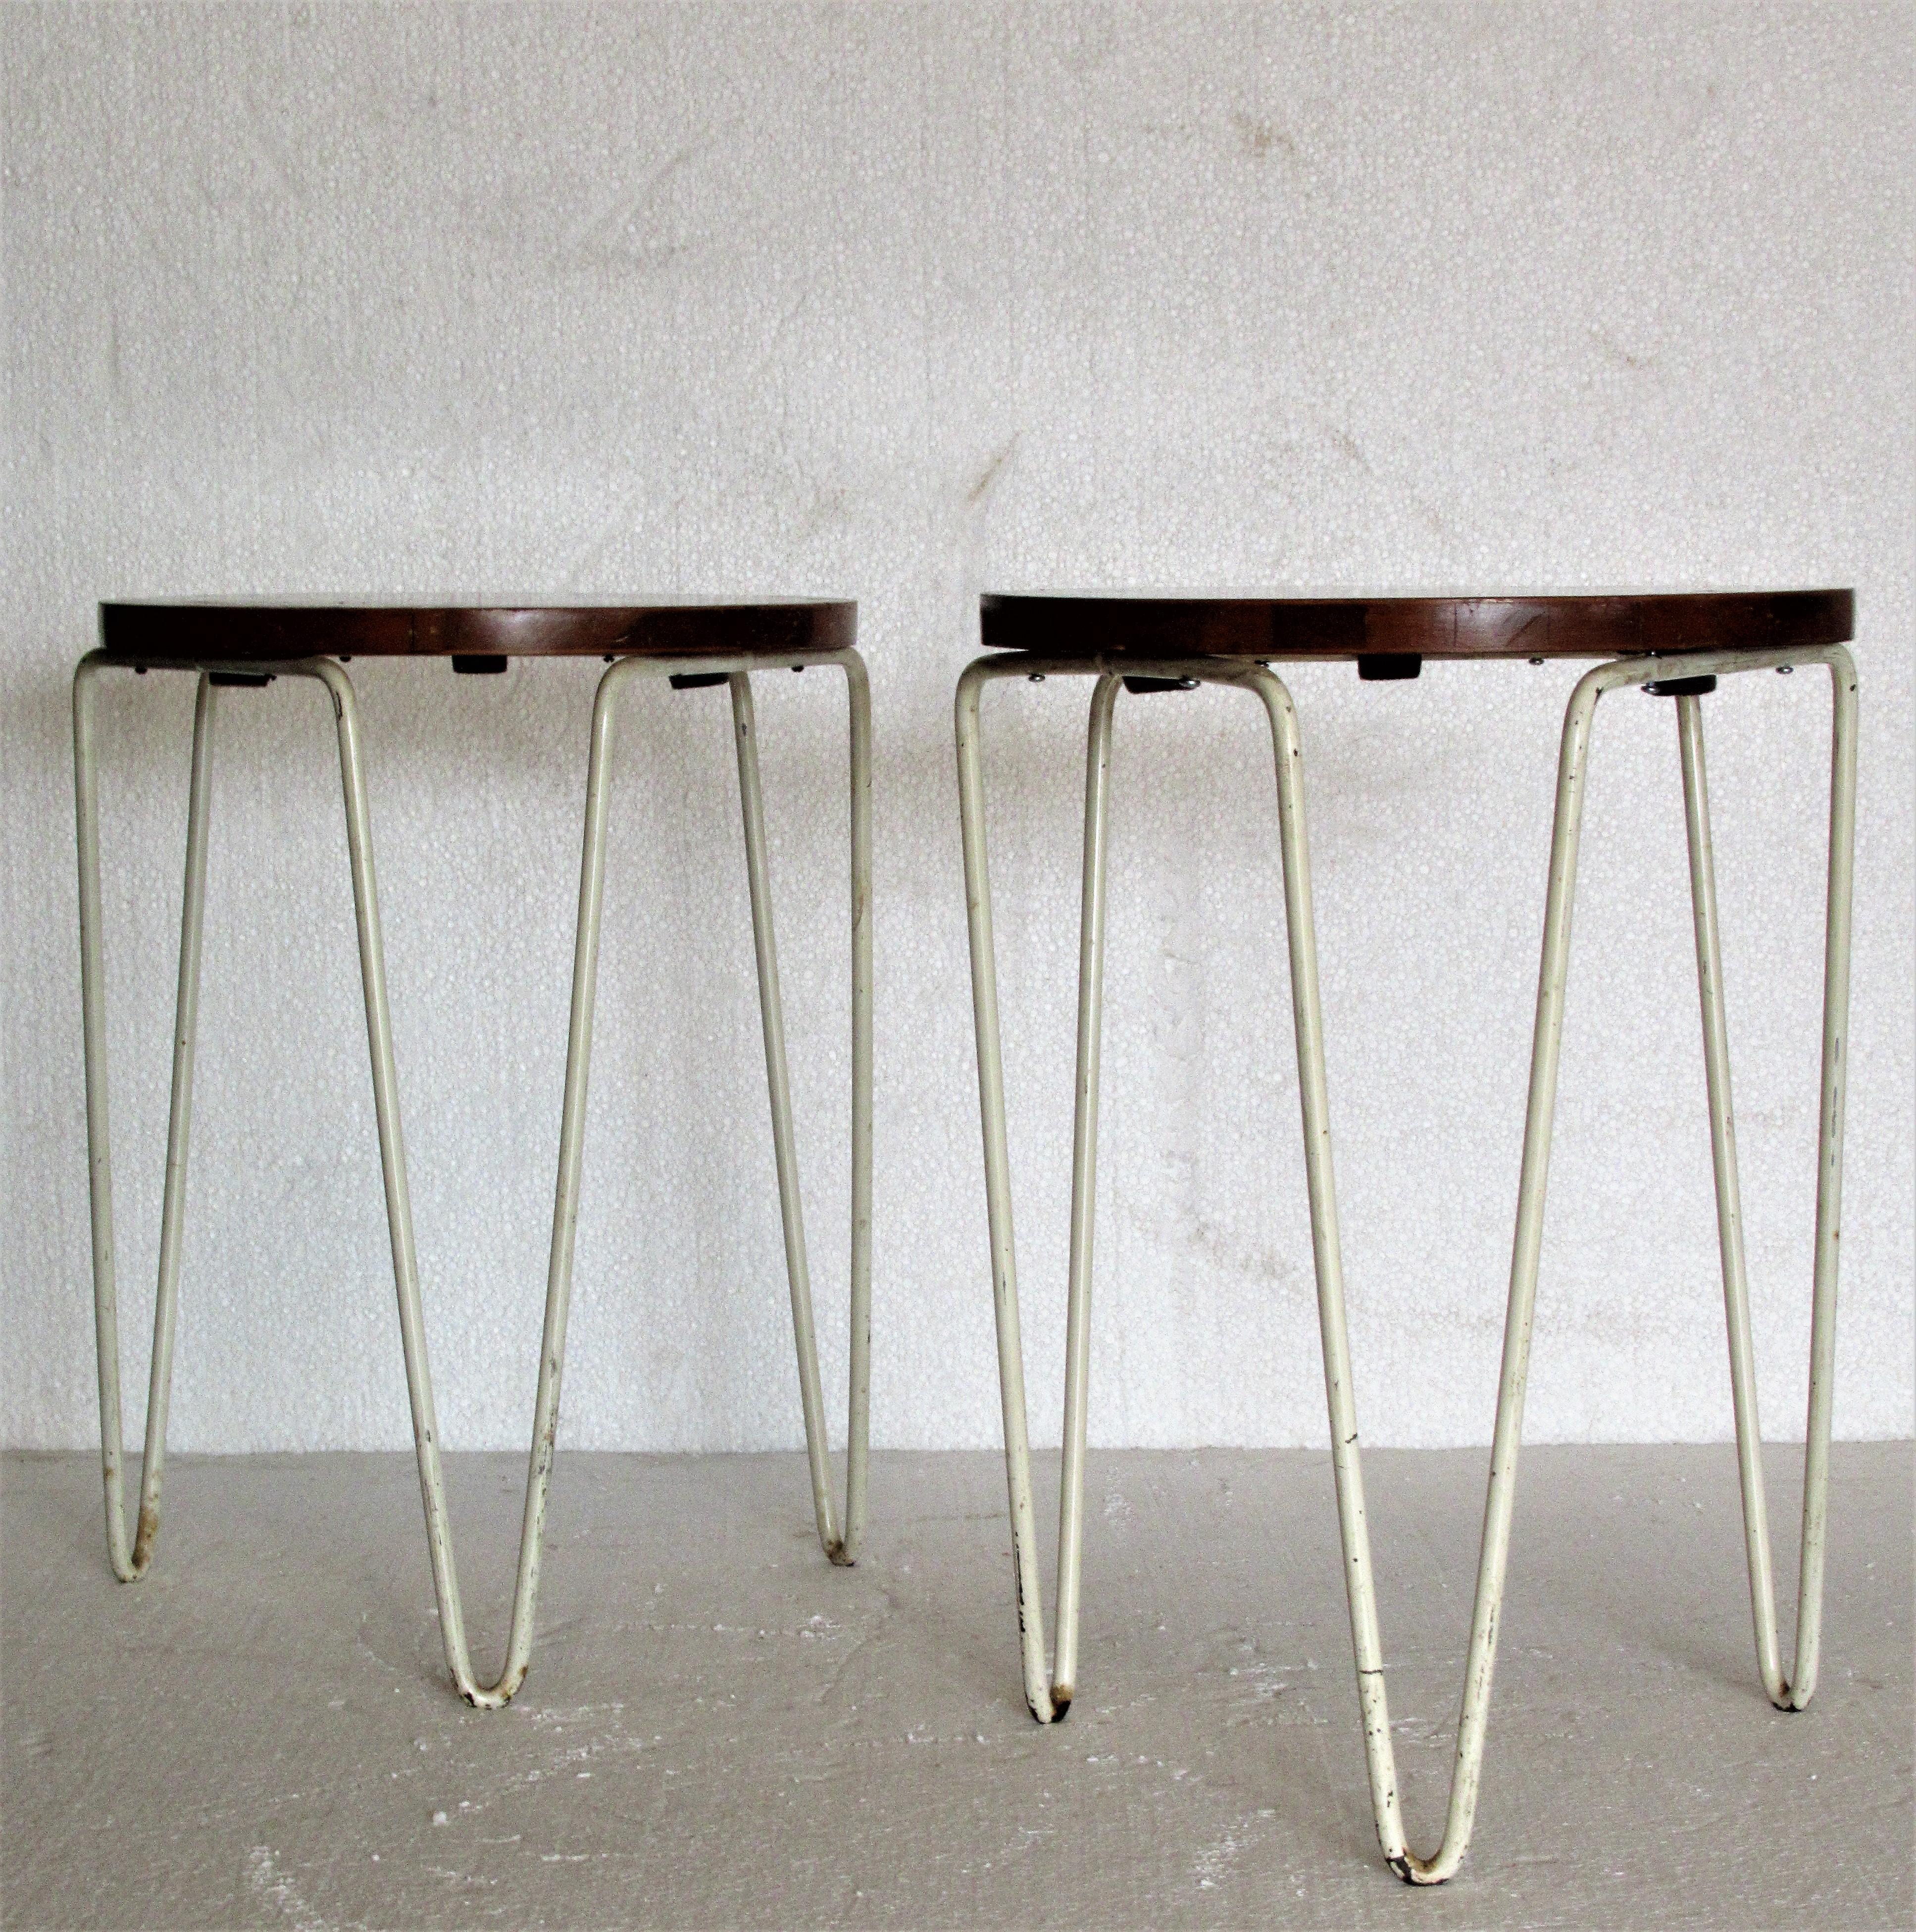 An early pair of Florence Knoll for Knoll associates stacking stools (tables) with original white enamel painted iron hairpin legs and birch wood tops. all-over nicely aged color to patina to wood and enamel painted steel, circa 1950. Look at all